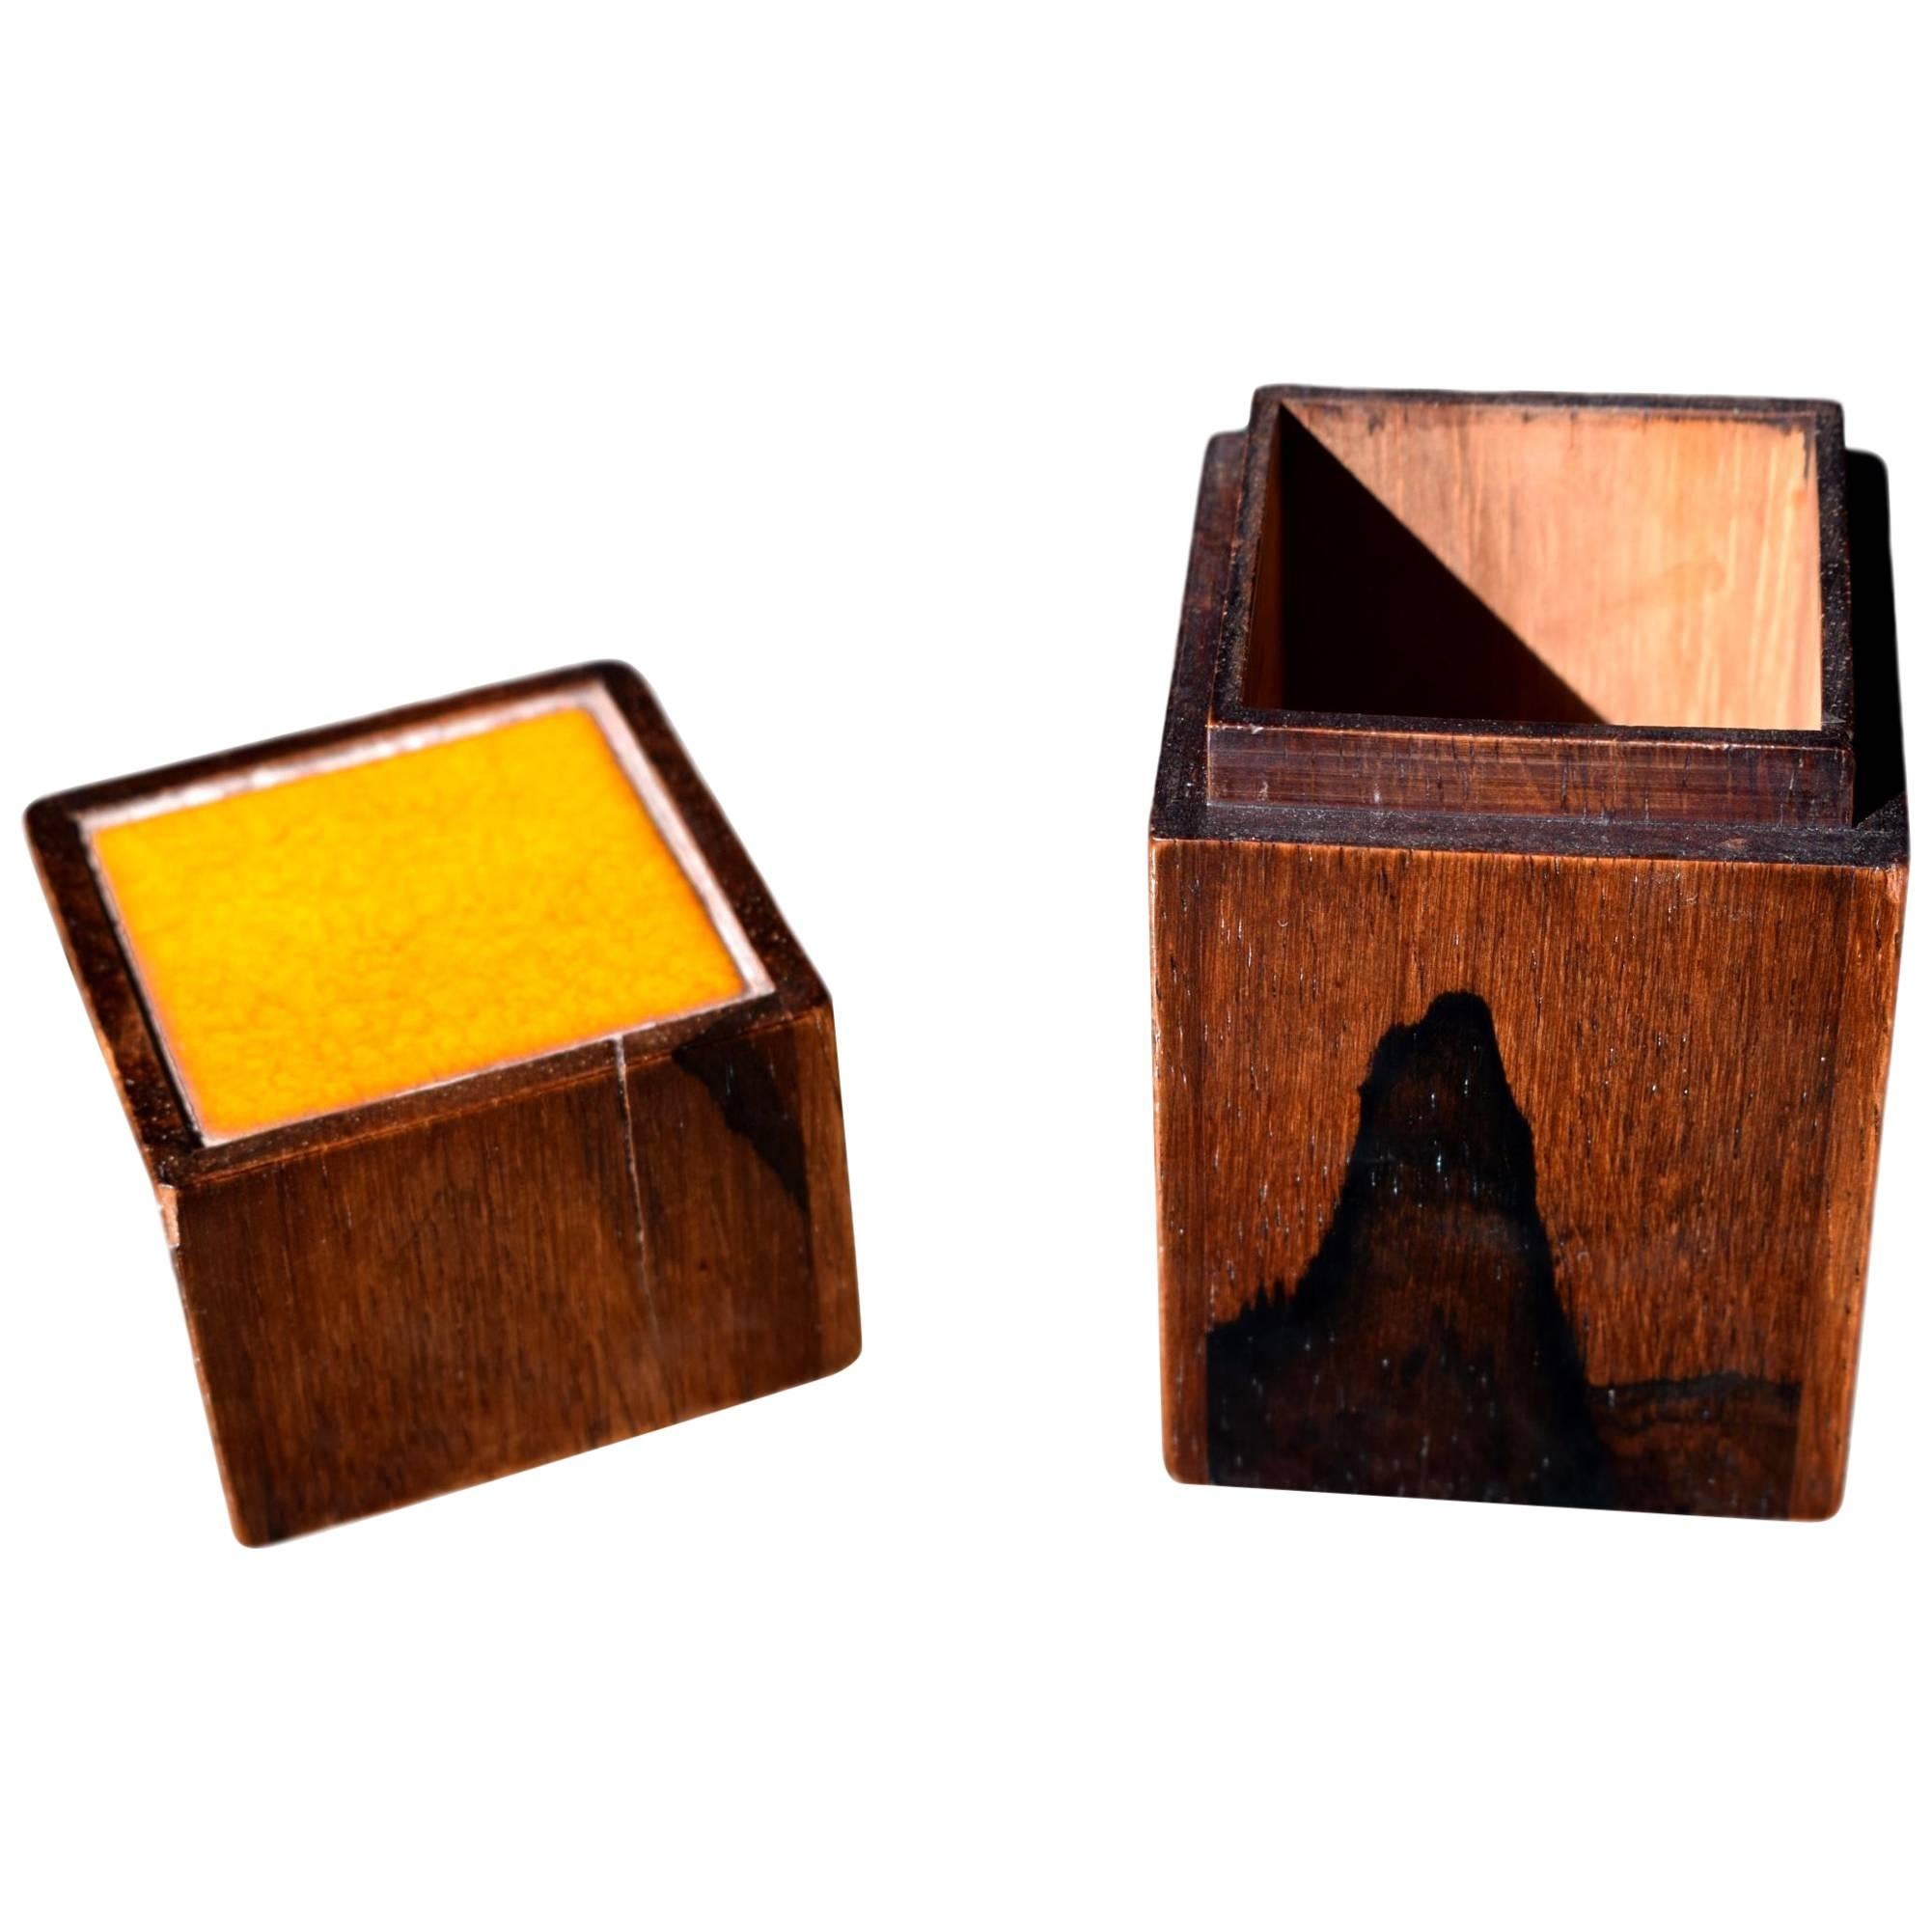 Danish Midcentury Rosewood Box by Alfred Klitgaard with Enamel by Bodil Eje For Sale